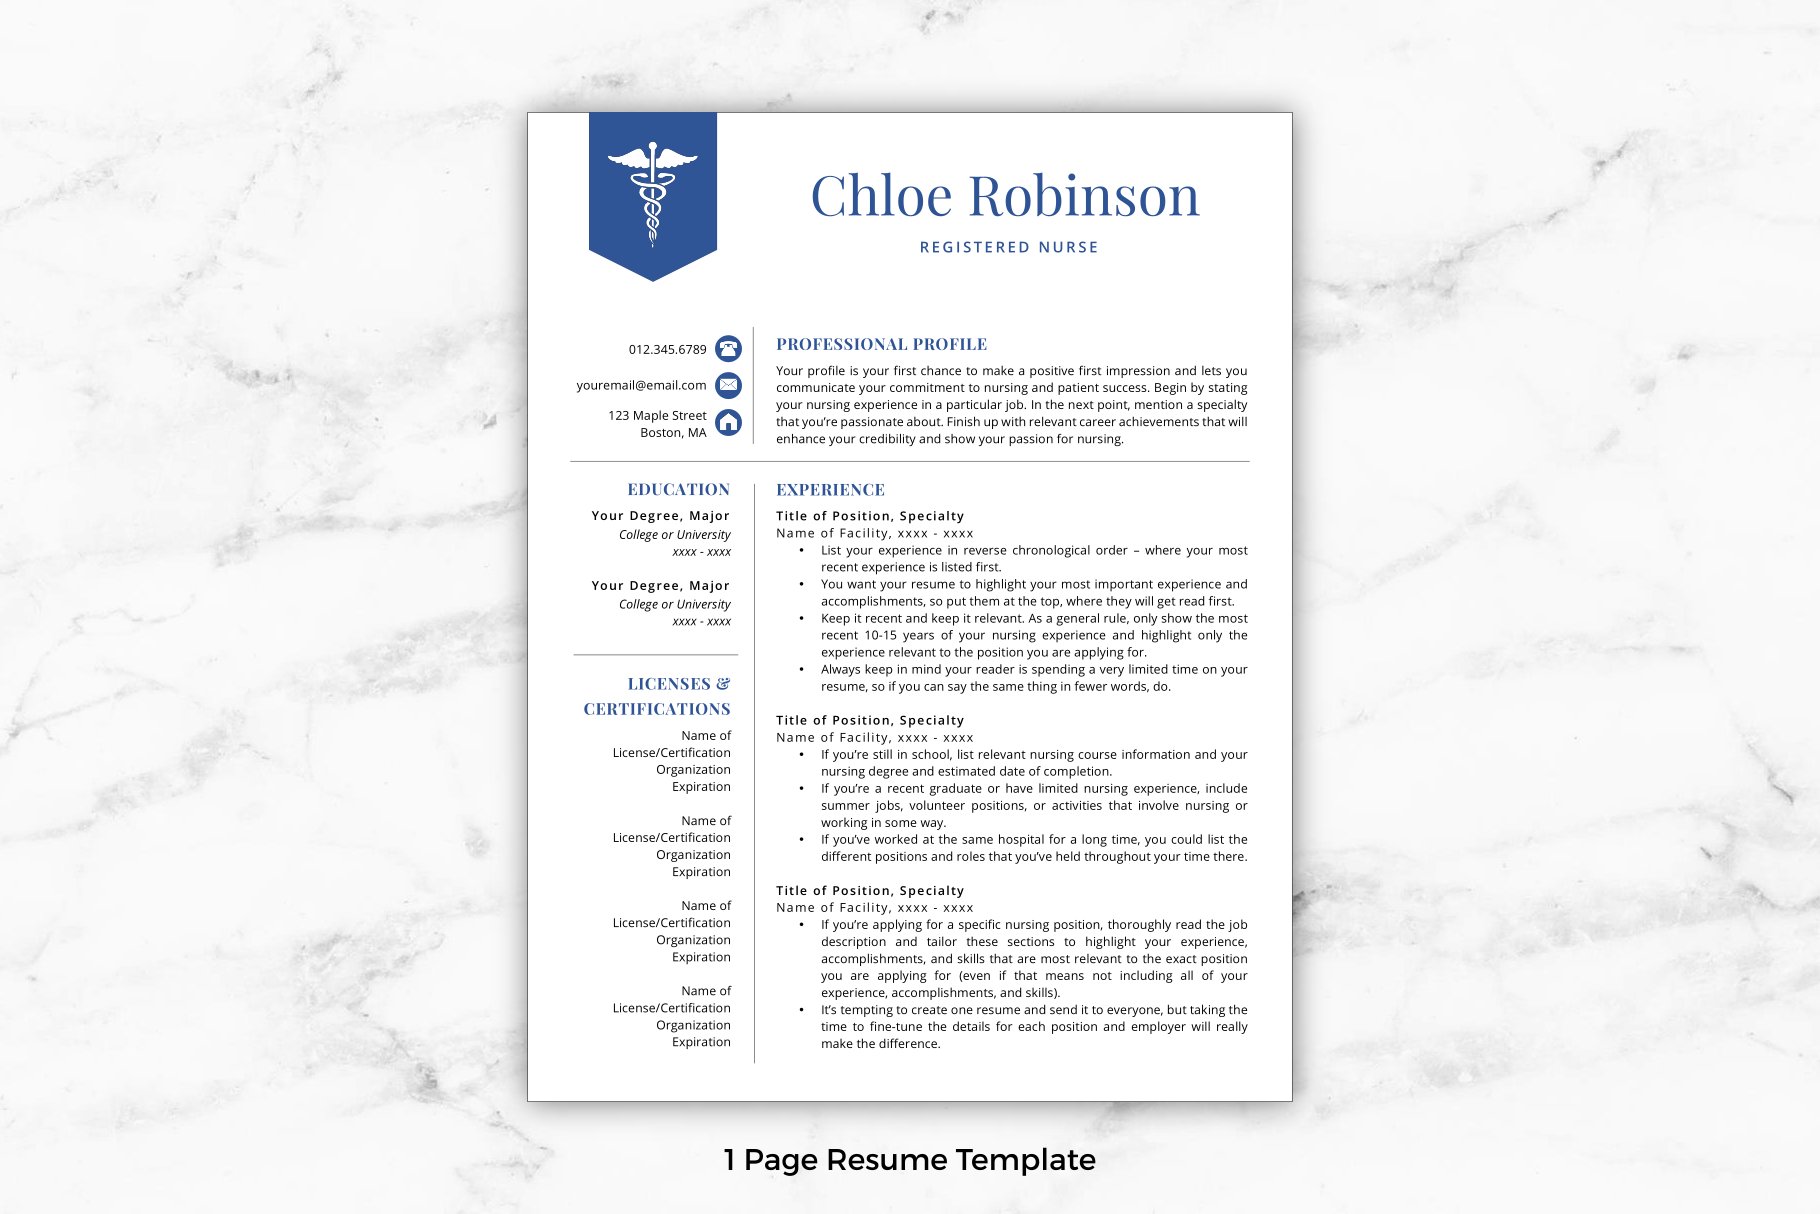 Blue and white medical resume template.